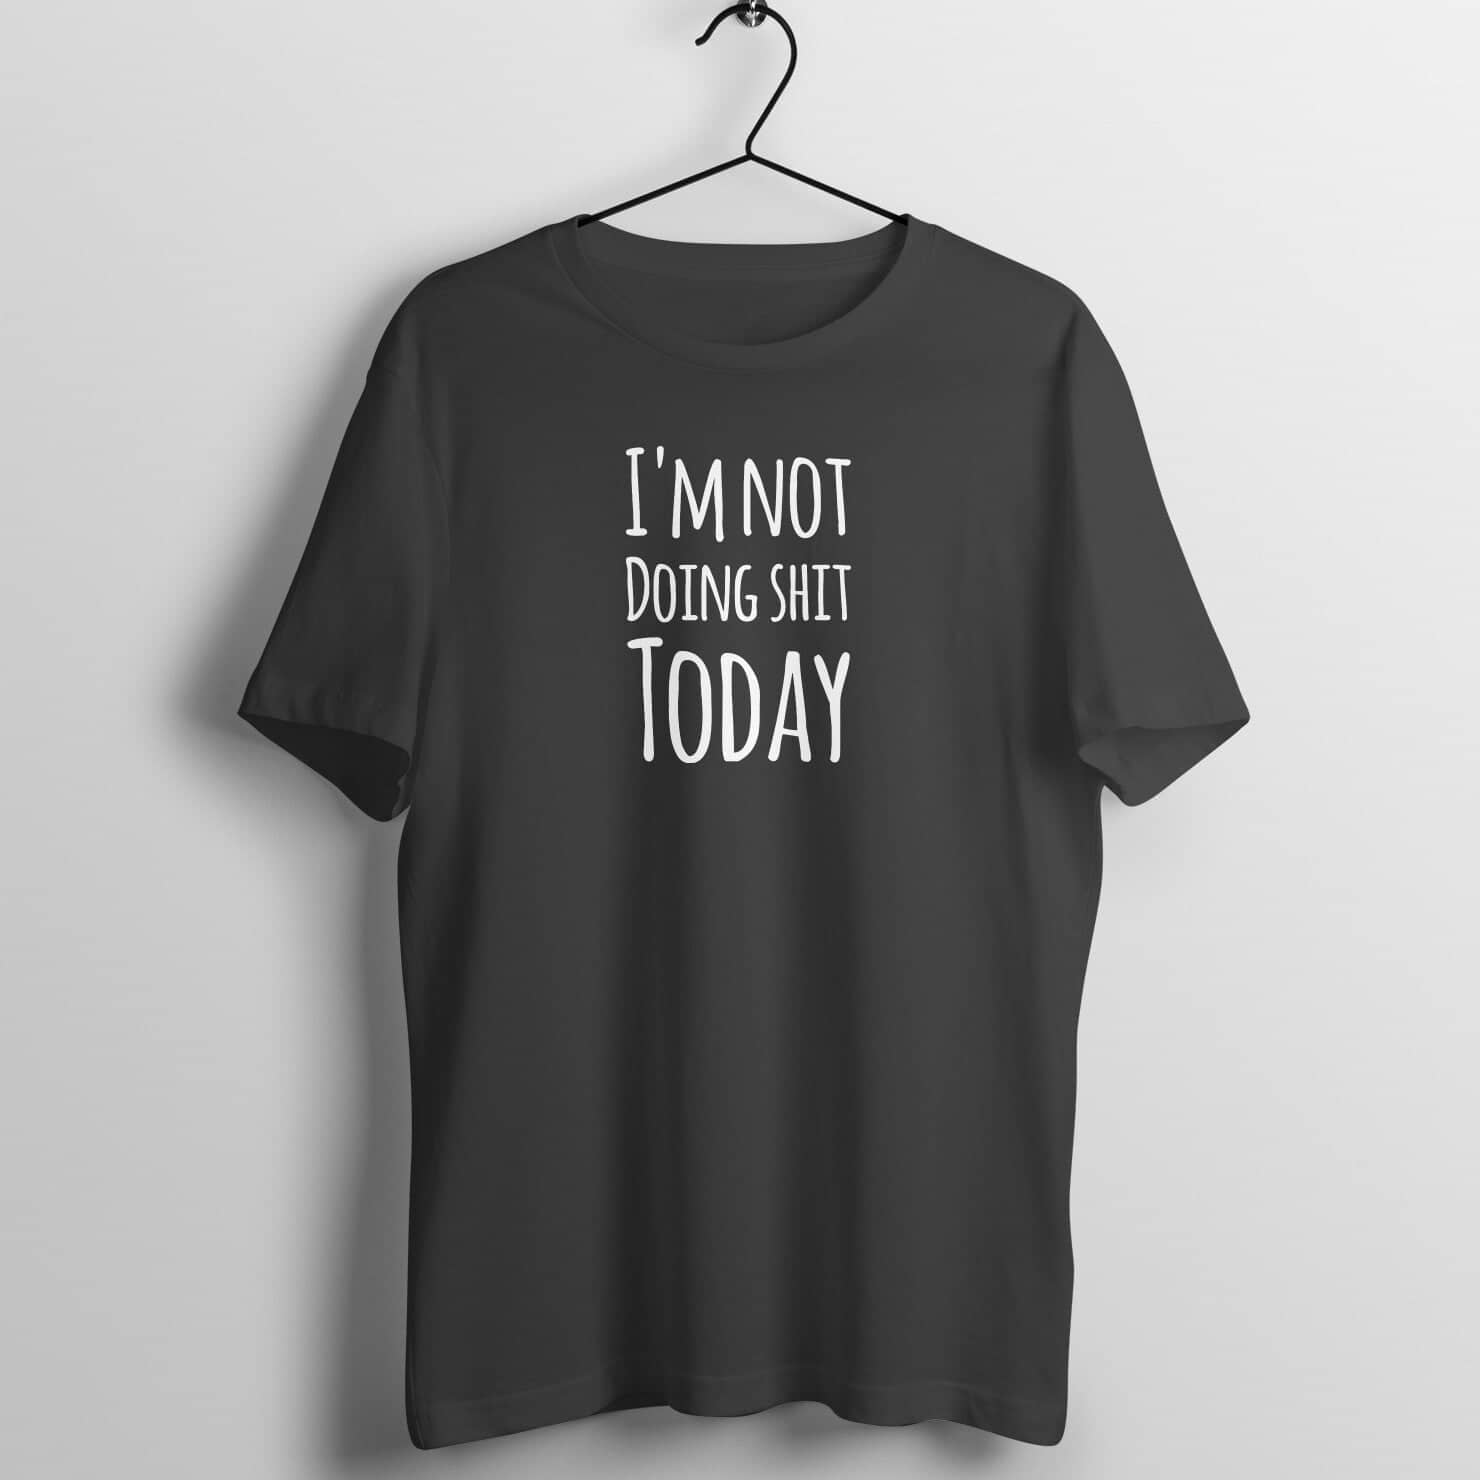 I'm Not Doing Shit Today Funny Black T Shirt for Men and Women Printrove Black S 